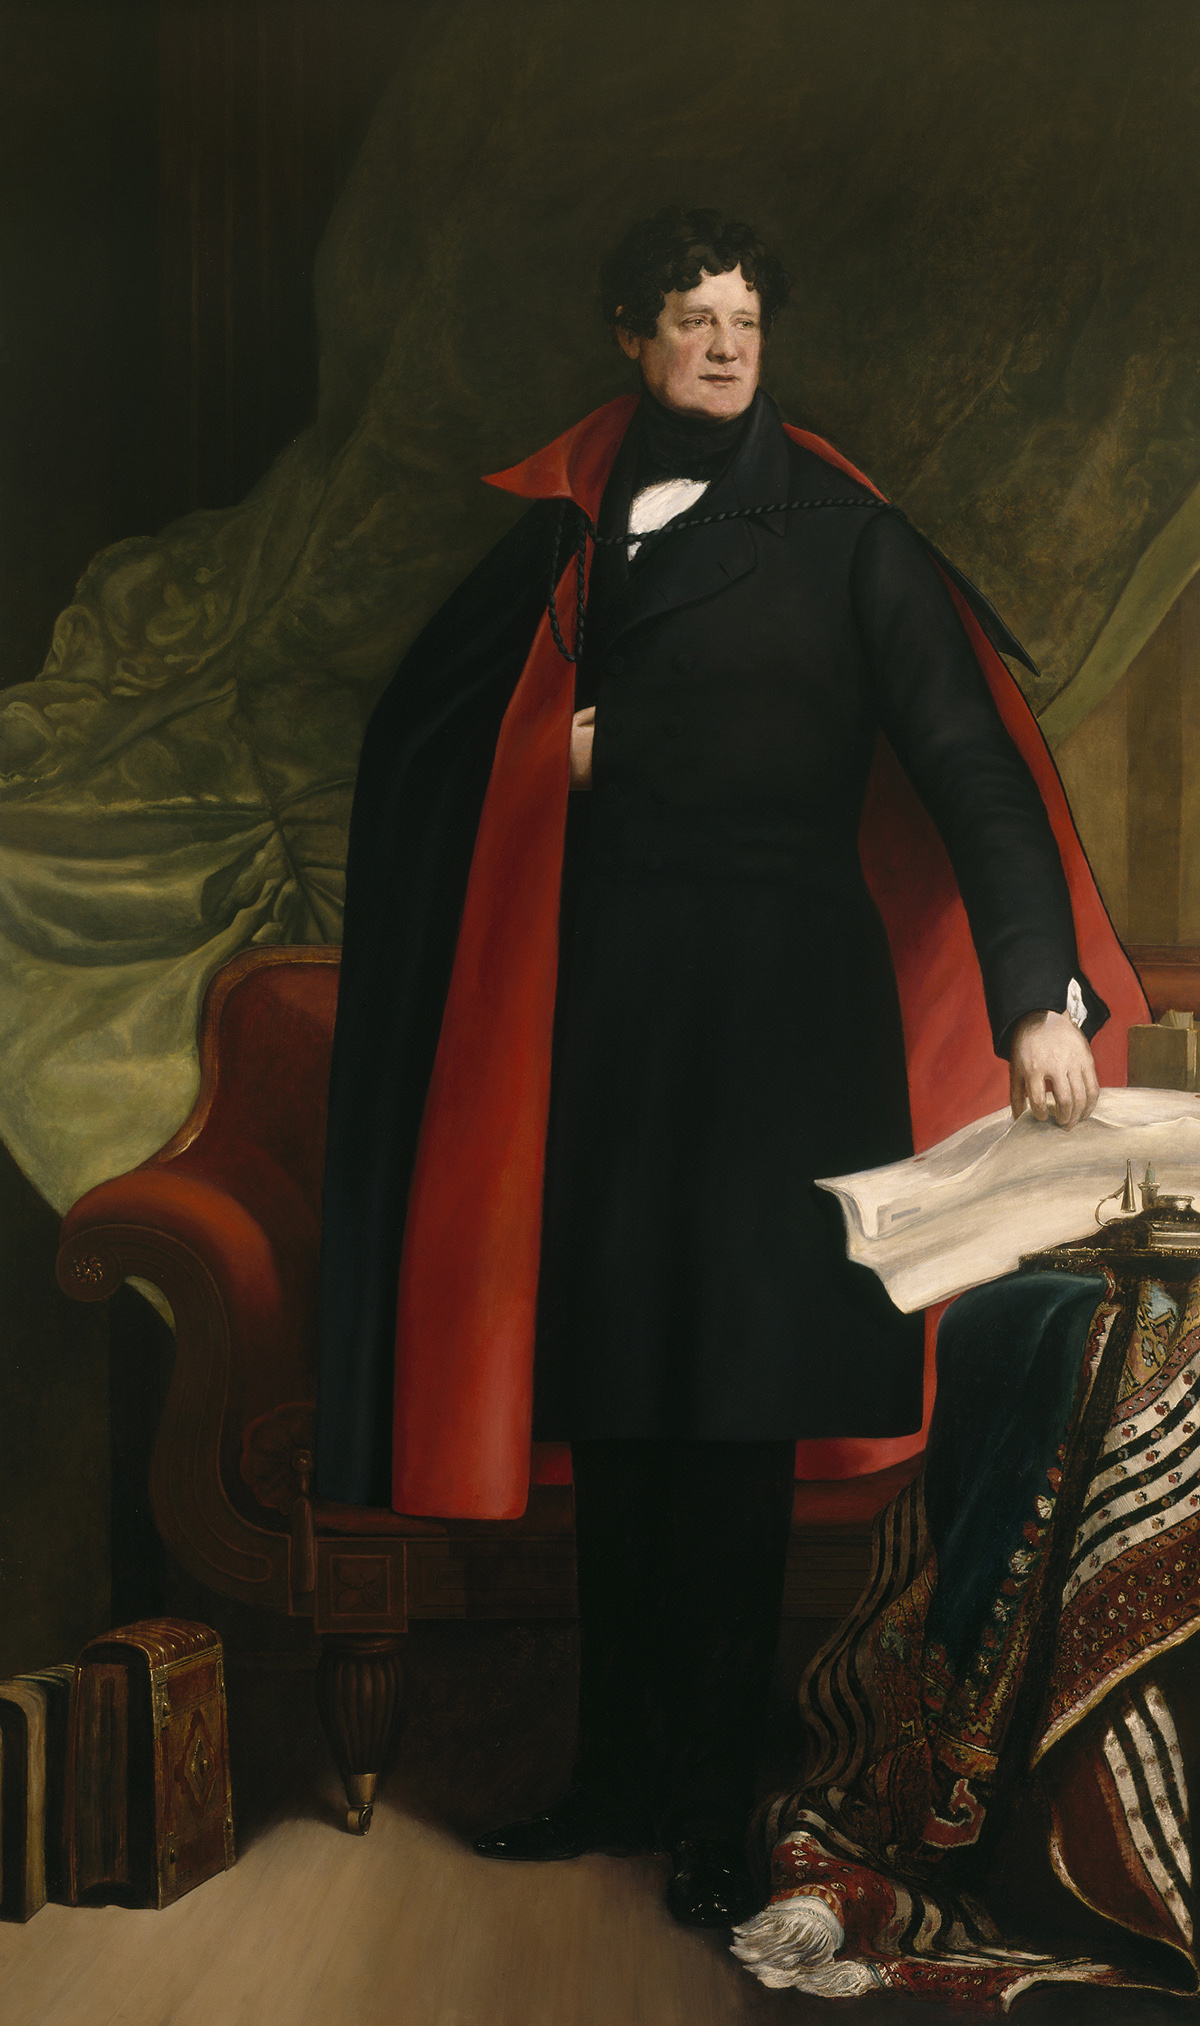 A full-length portrait. Daniel O'Connell wears a red-lined cloak, with one hand on his breast.